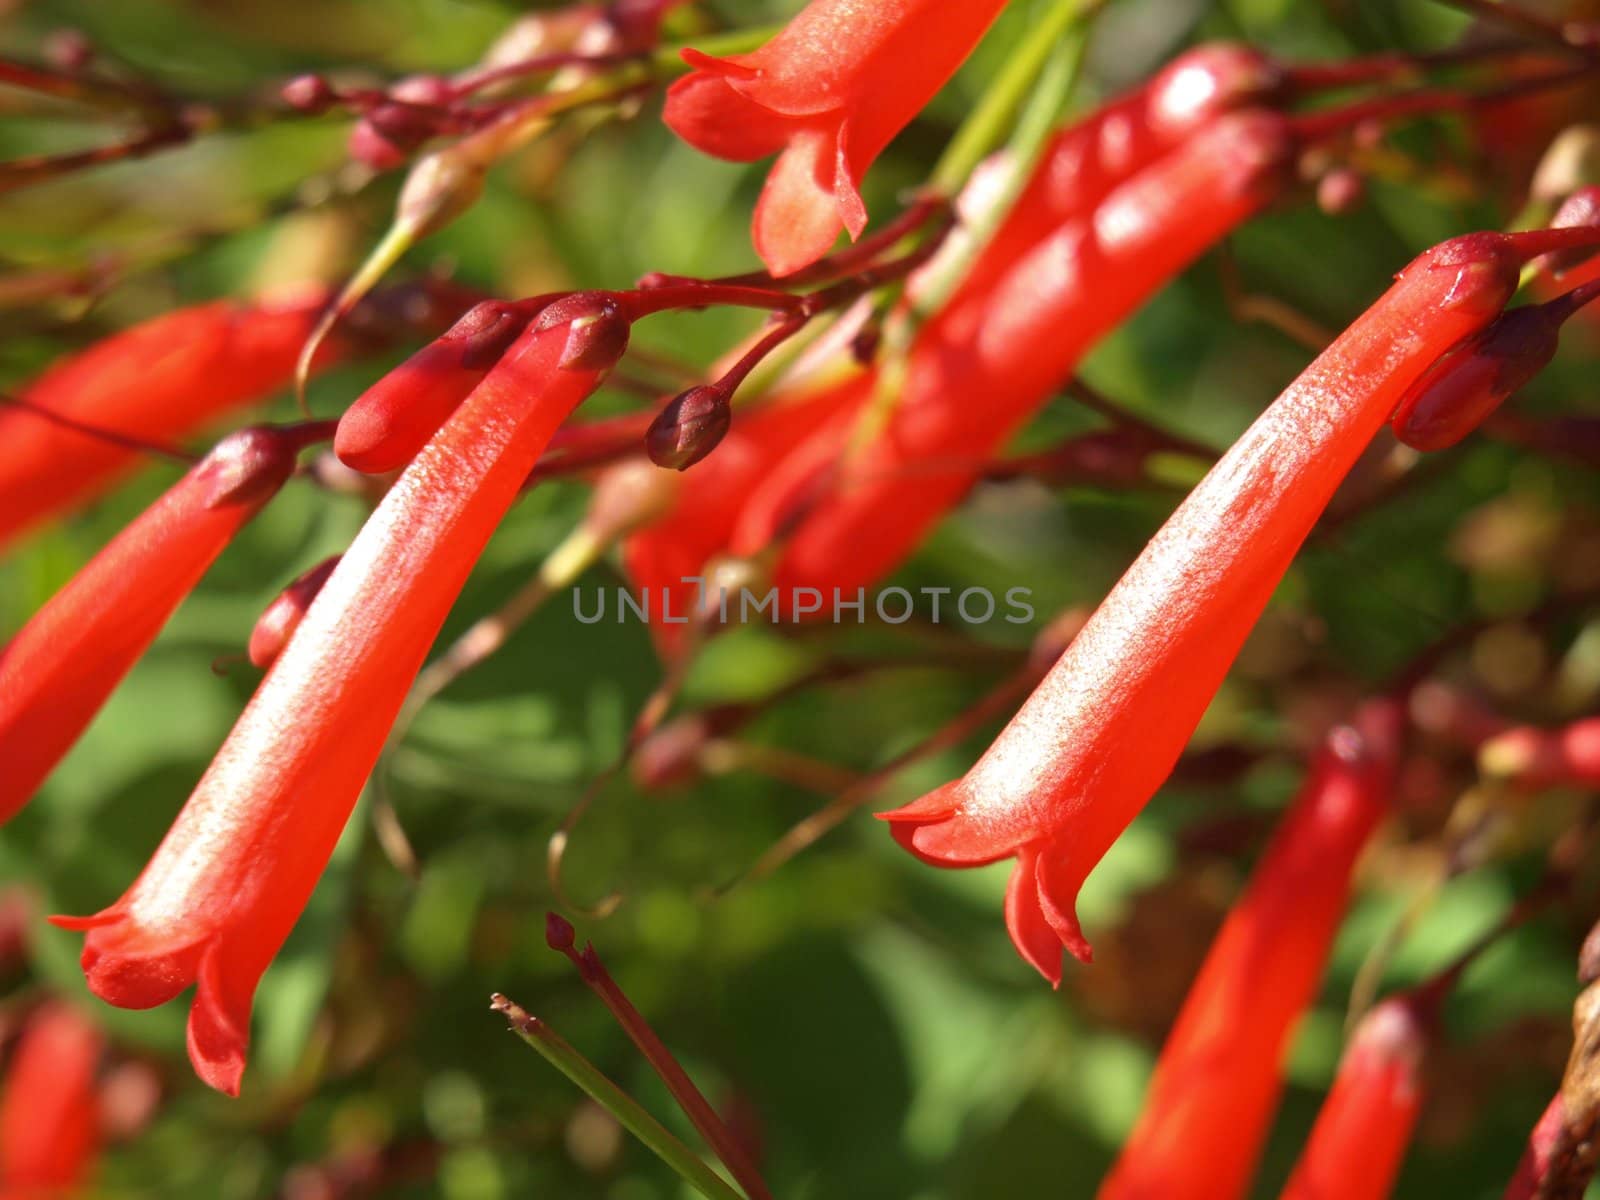 a close-up image of some red bellflowers